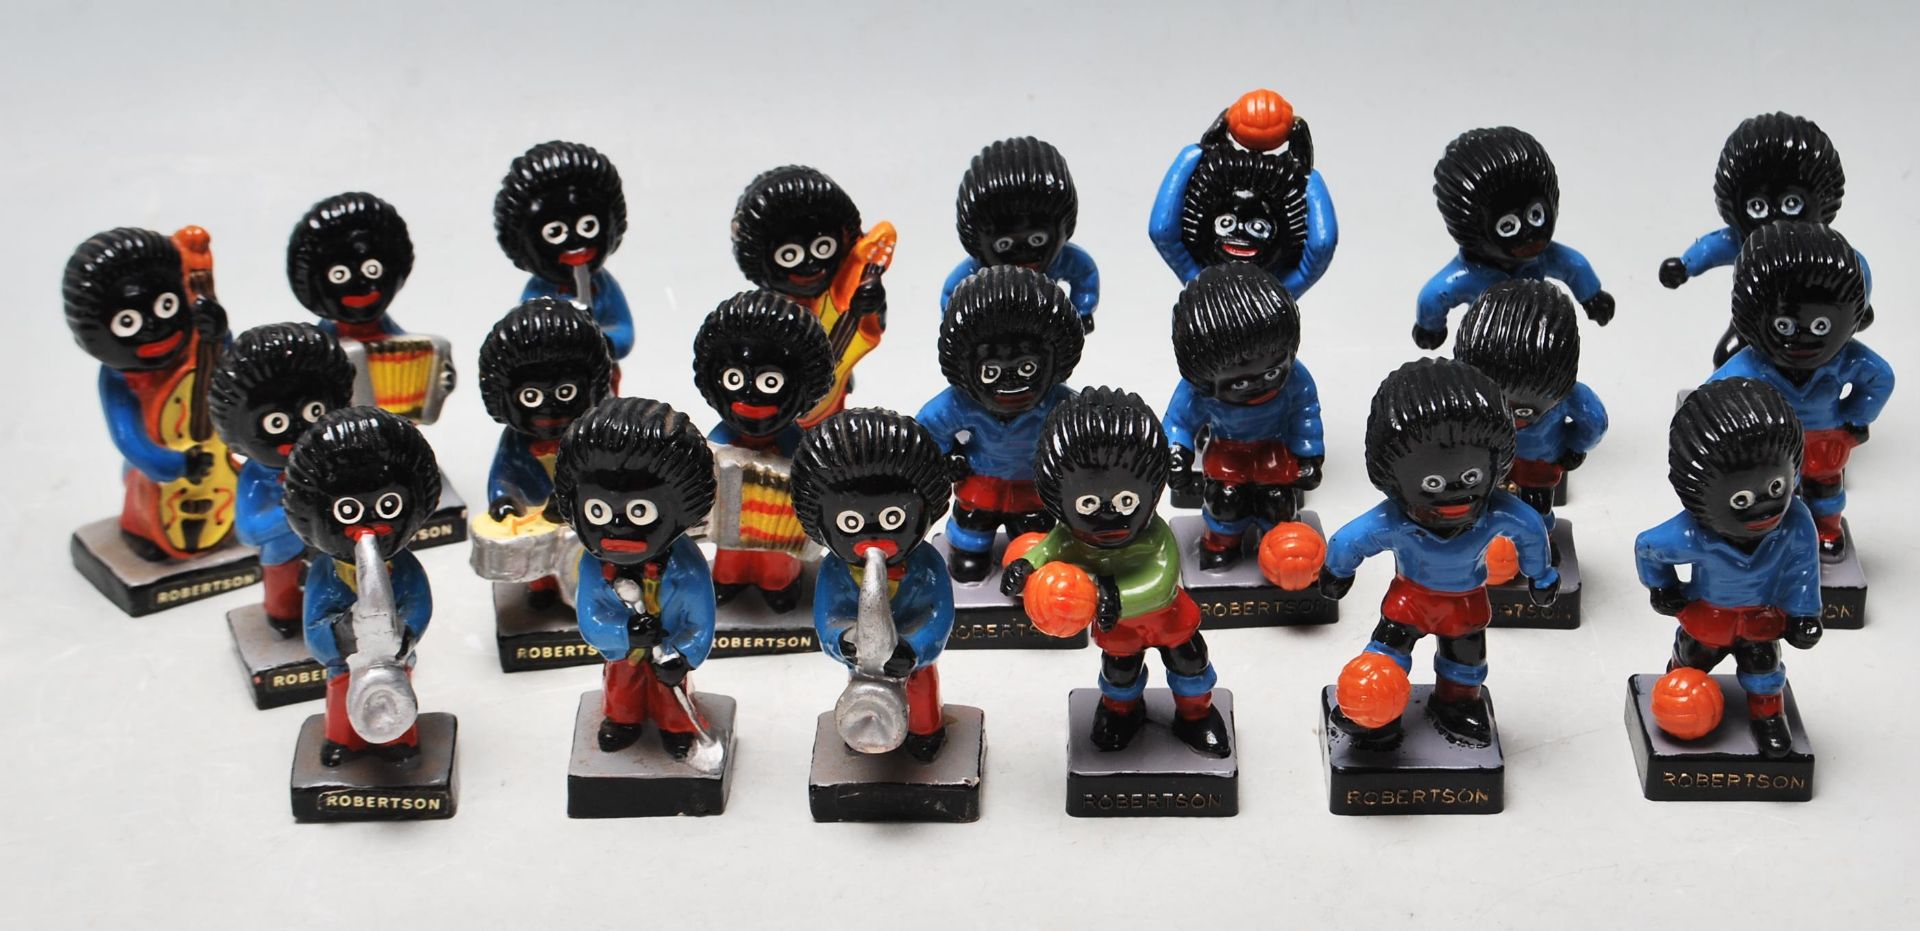 A COLLECTION OF 21 GOLLY FIGURINES BY ROBERTSON